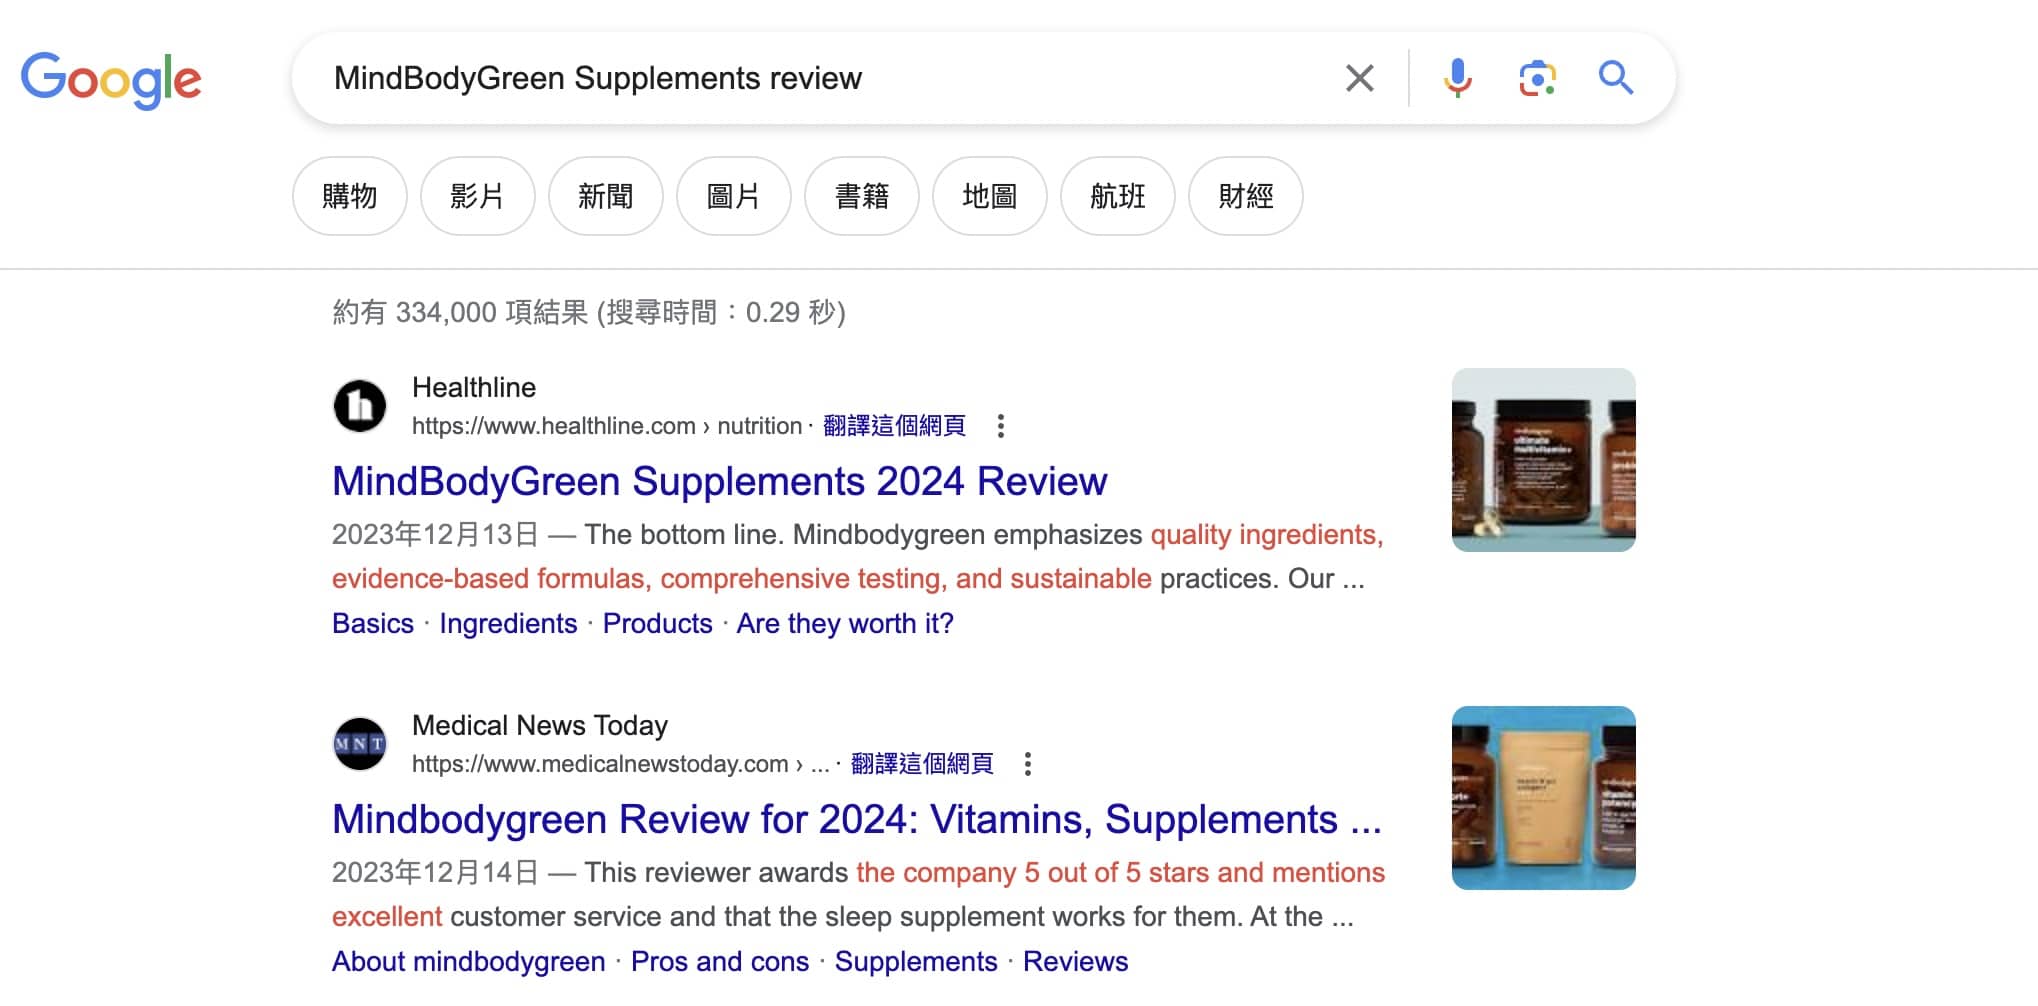 MindBodyGreen Supplements review search results